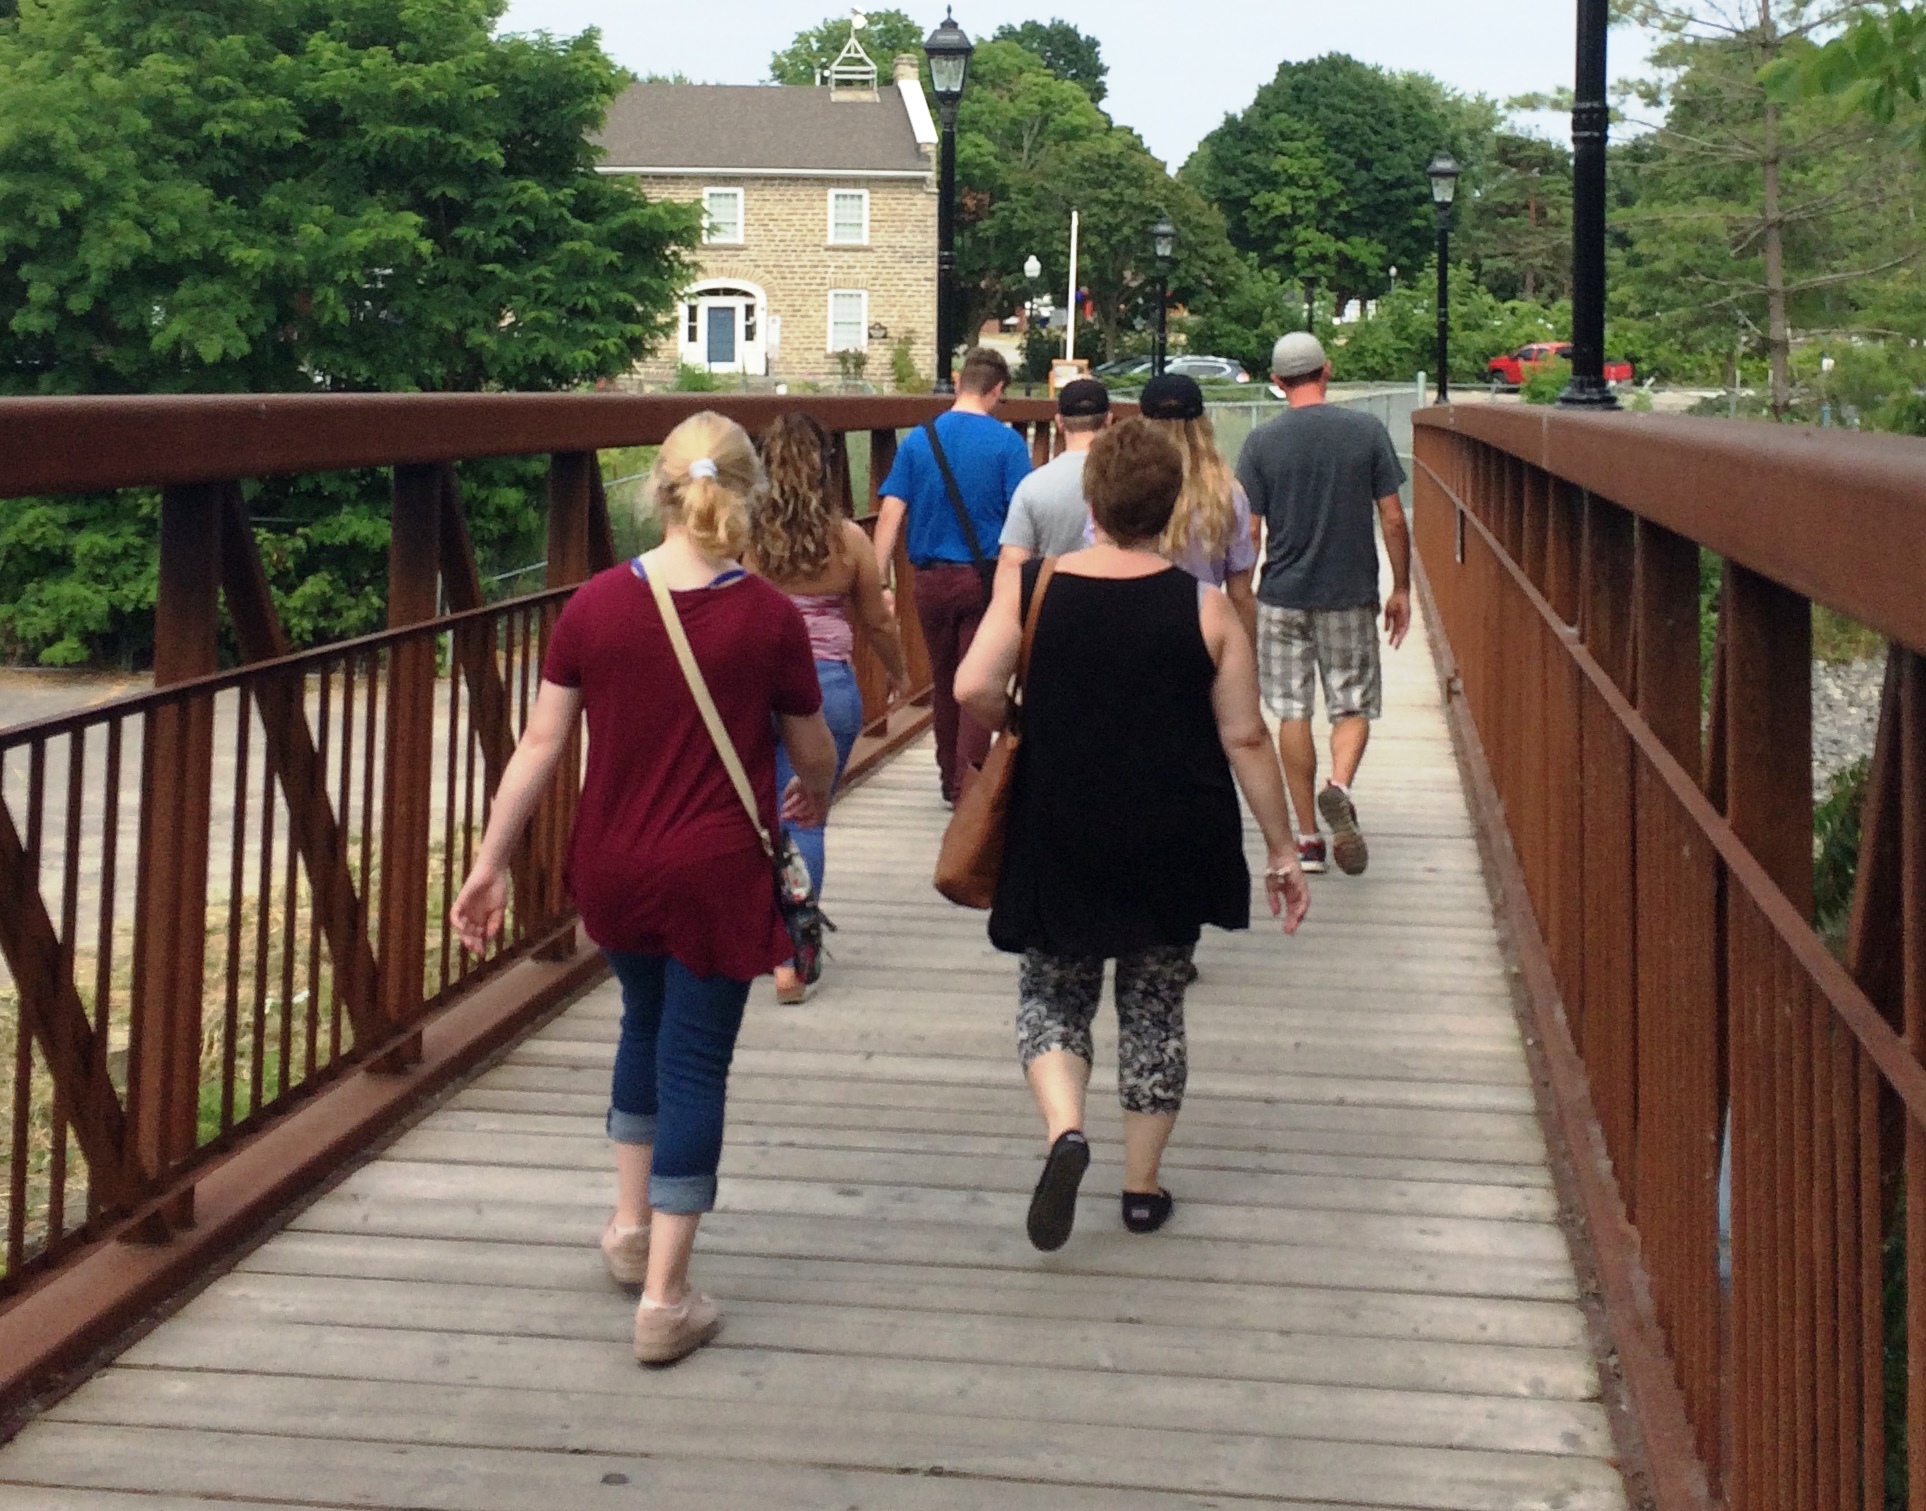 Group of people walking across a bridge towards an old building.